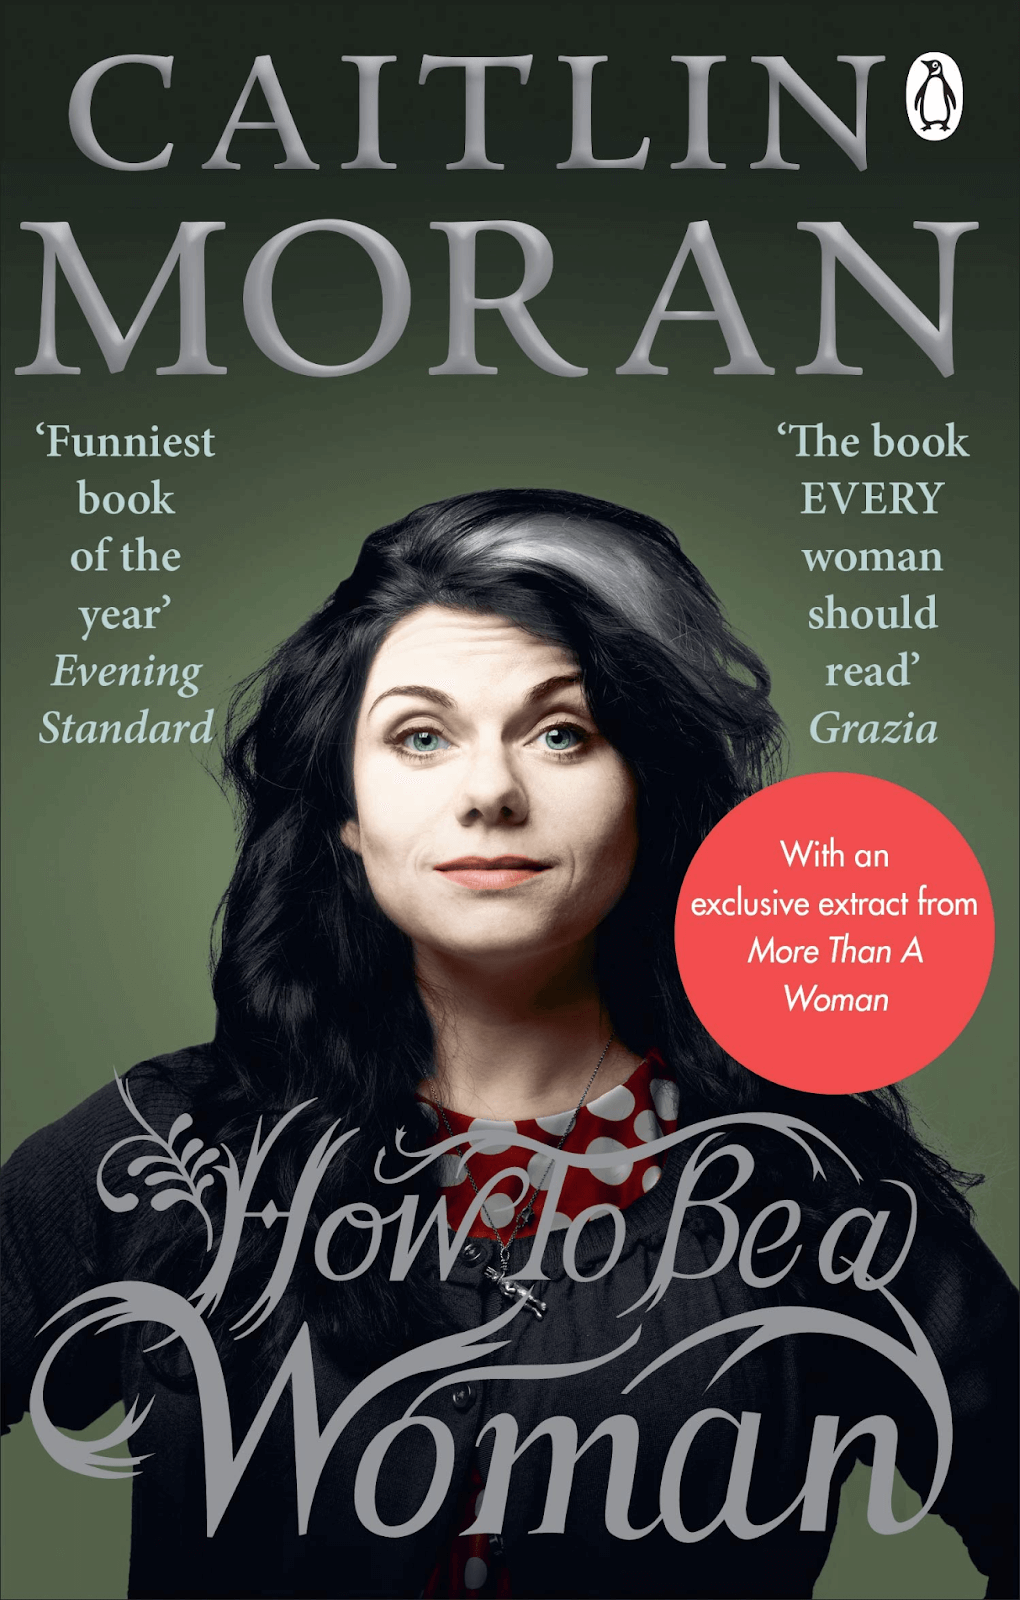 How to be a woman by Caitlin Moran